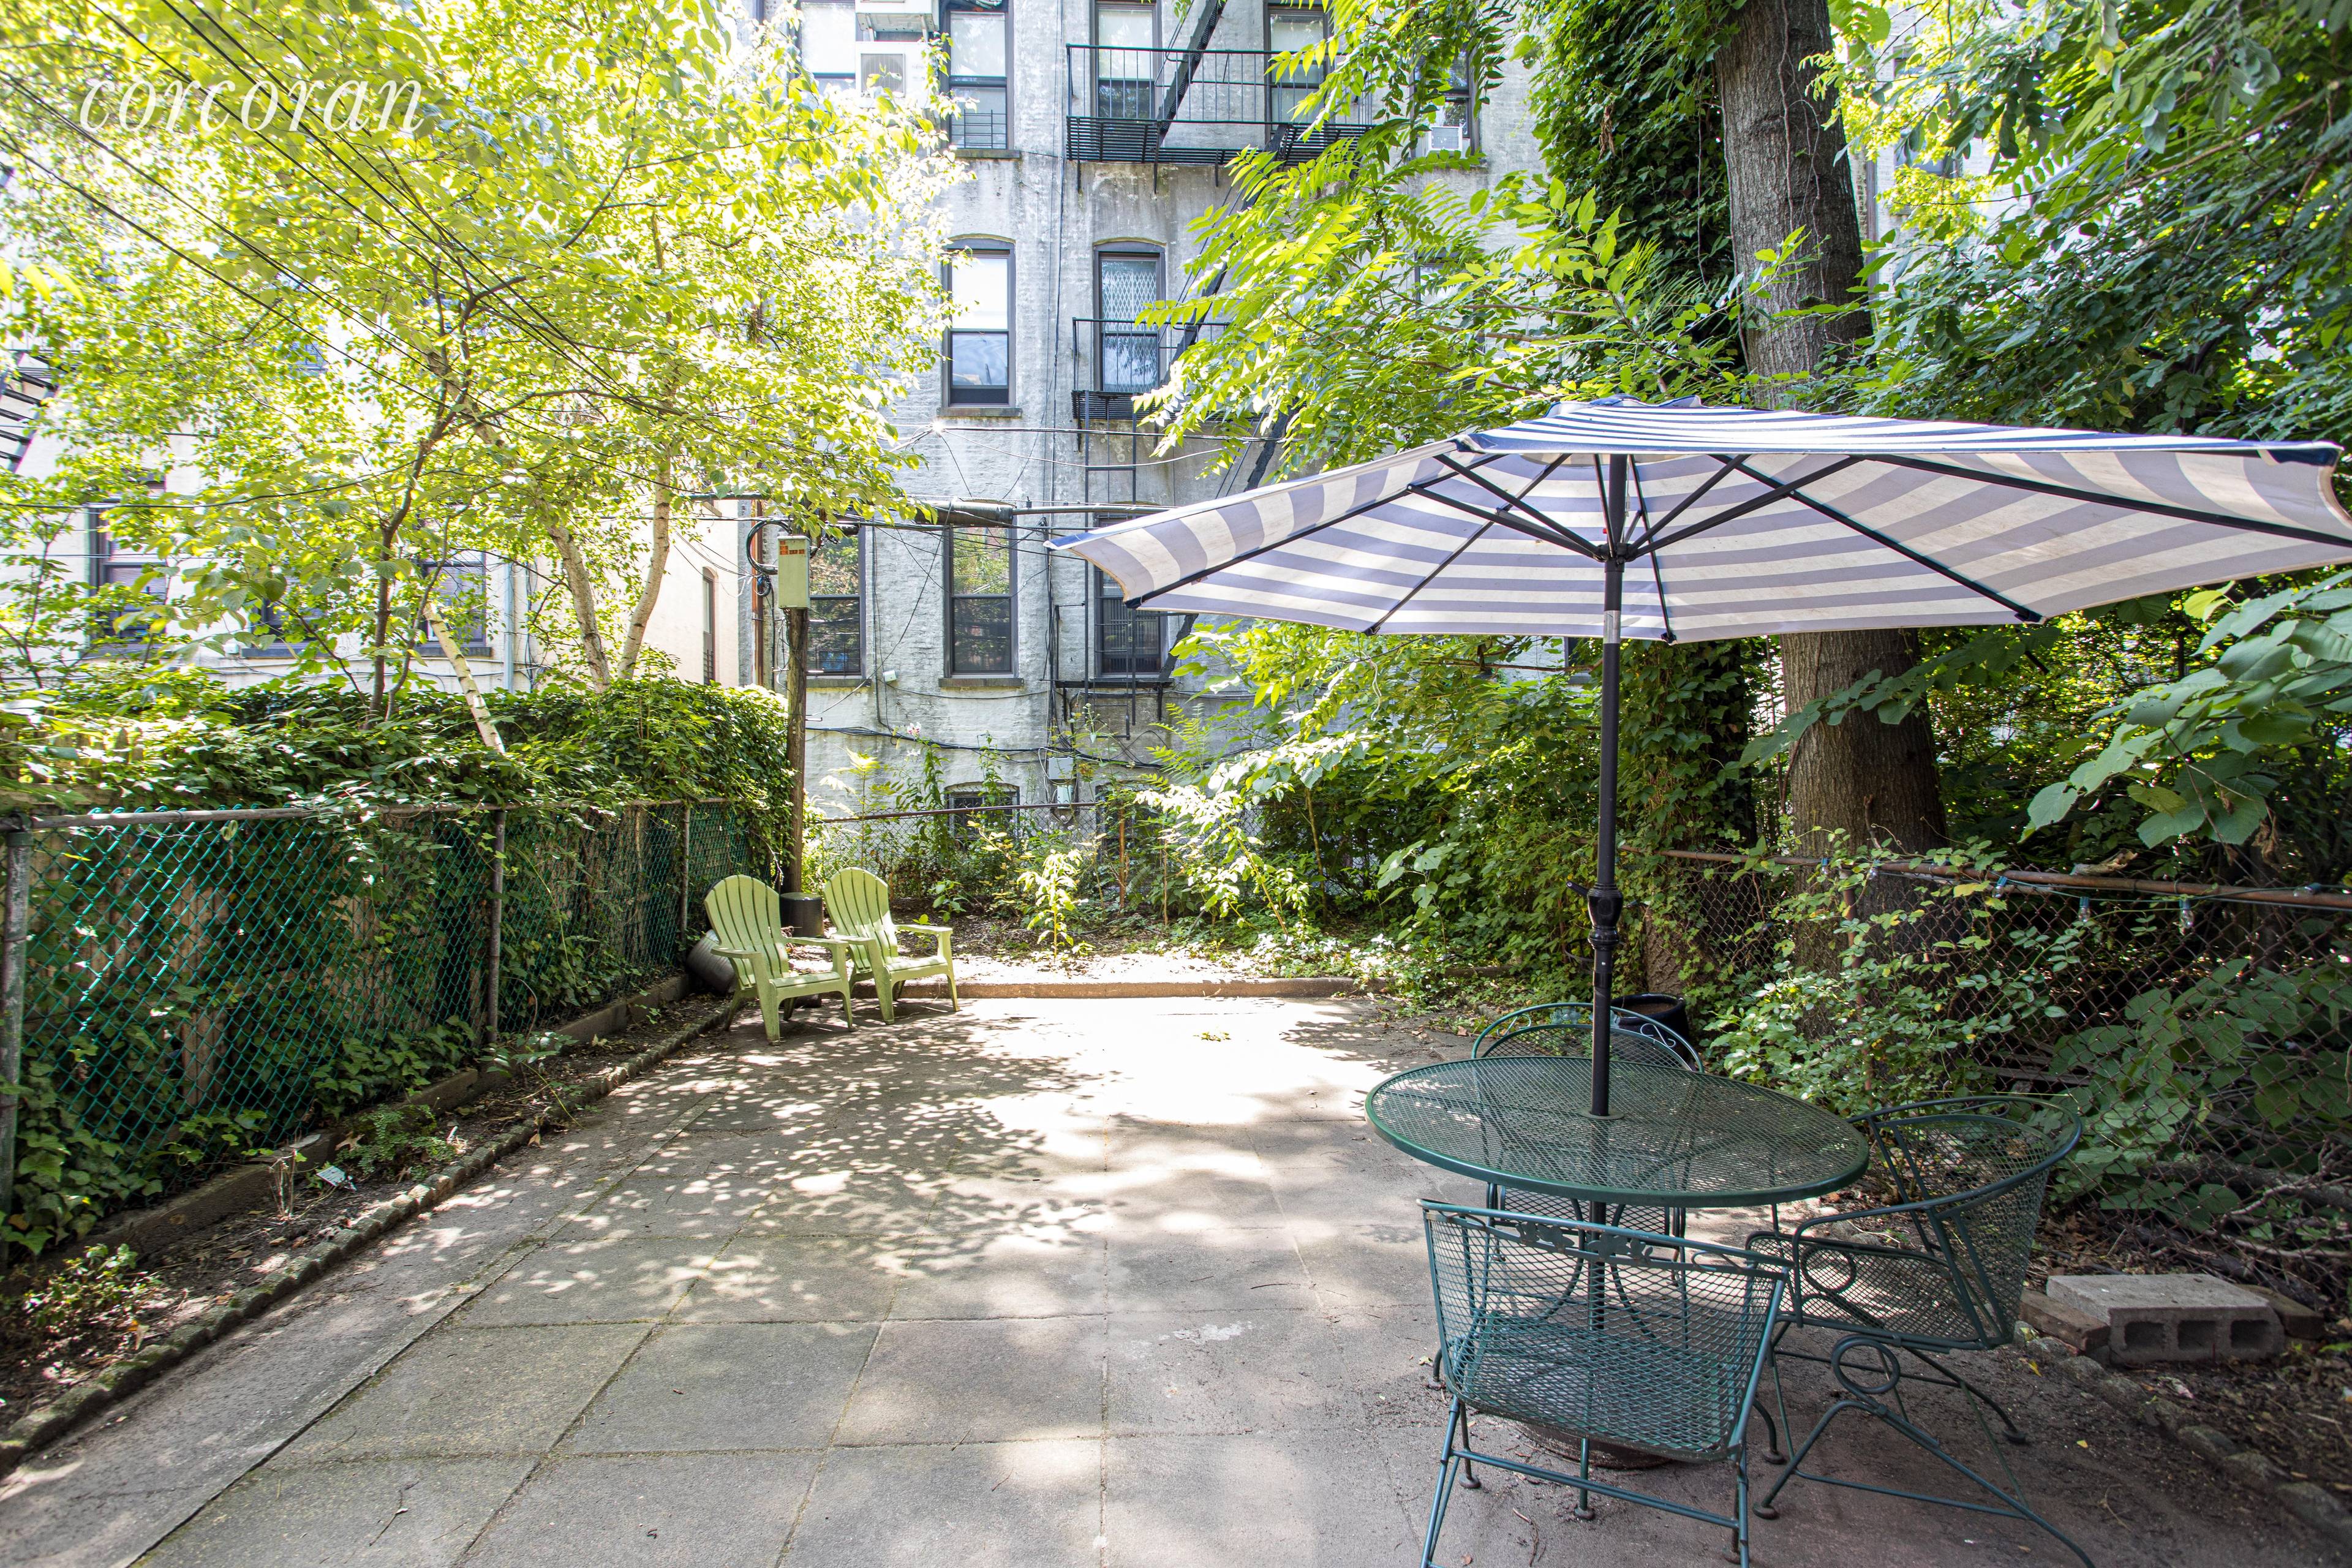 Quintessential garden apartment with private backyard in the heart of Park Slope !